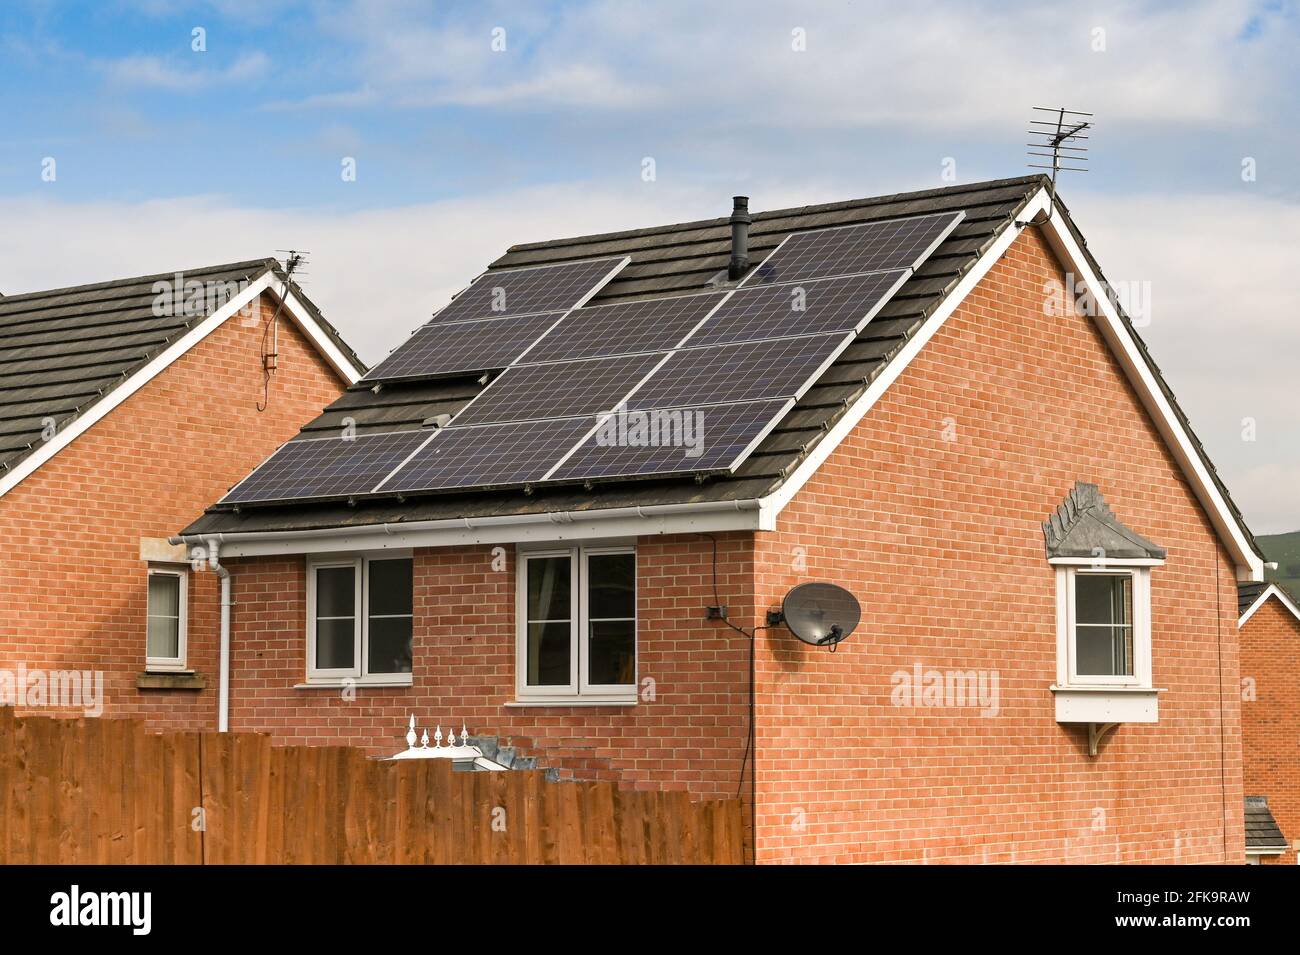 Llanharan, South Wales - April 2021: Solar panels on the roof of a detached house on a new housing development . Stock Photo